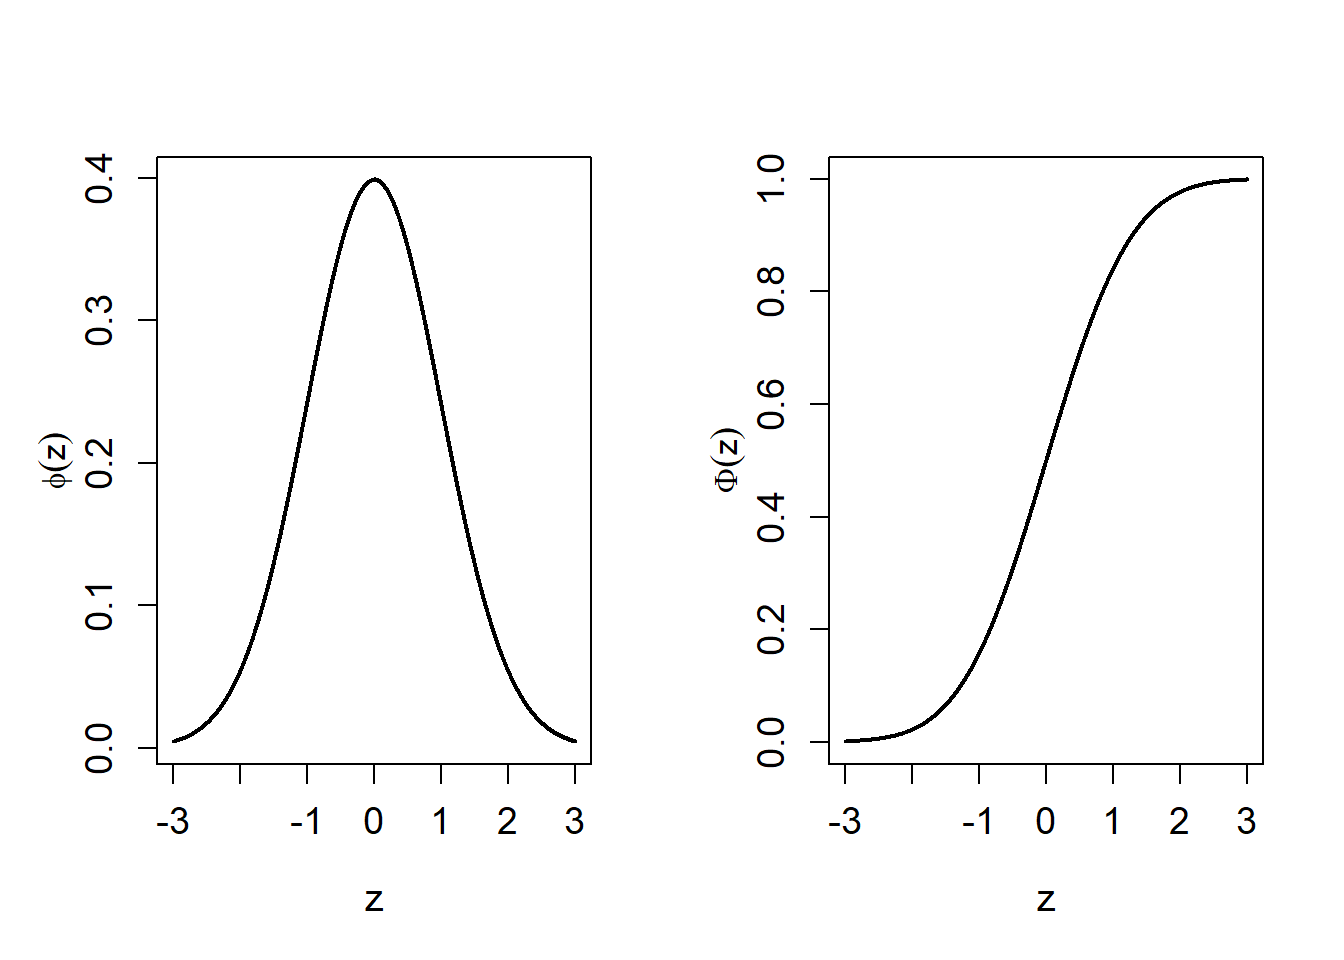 Standard normal, Z~N(0,1), p.d.f. and c.d.f.